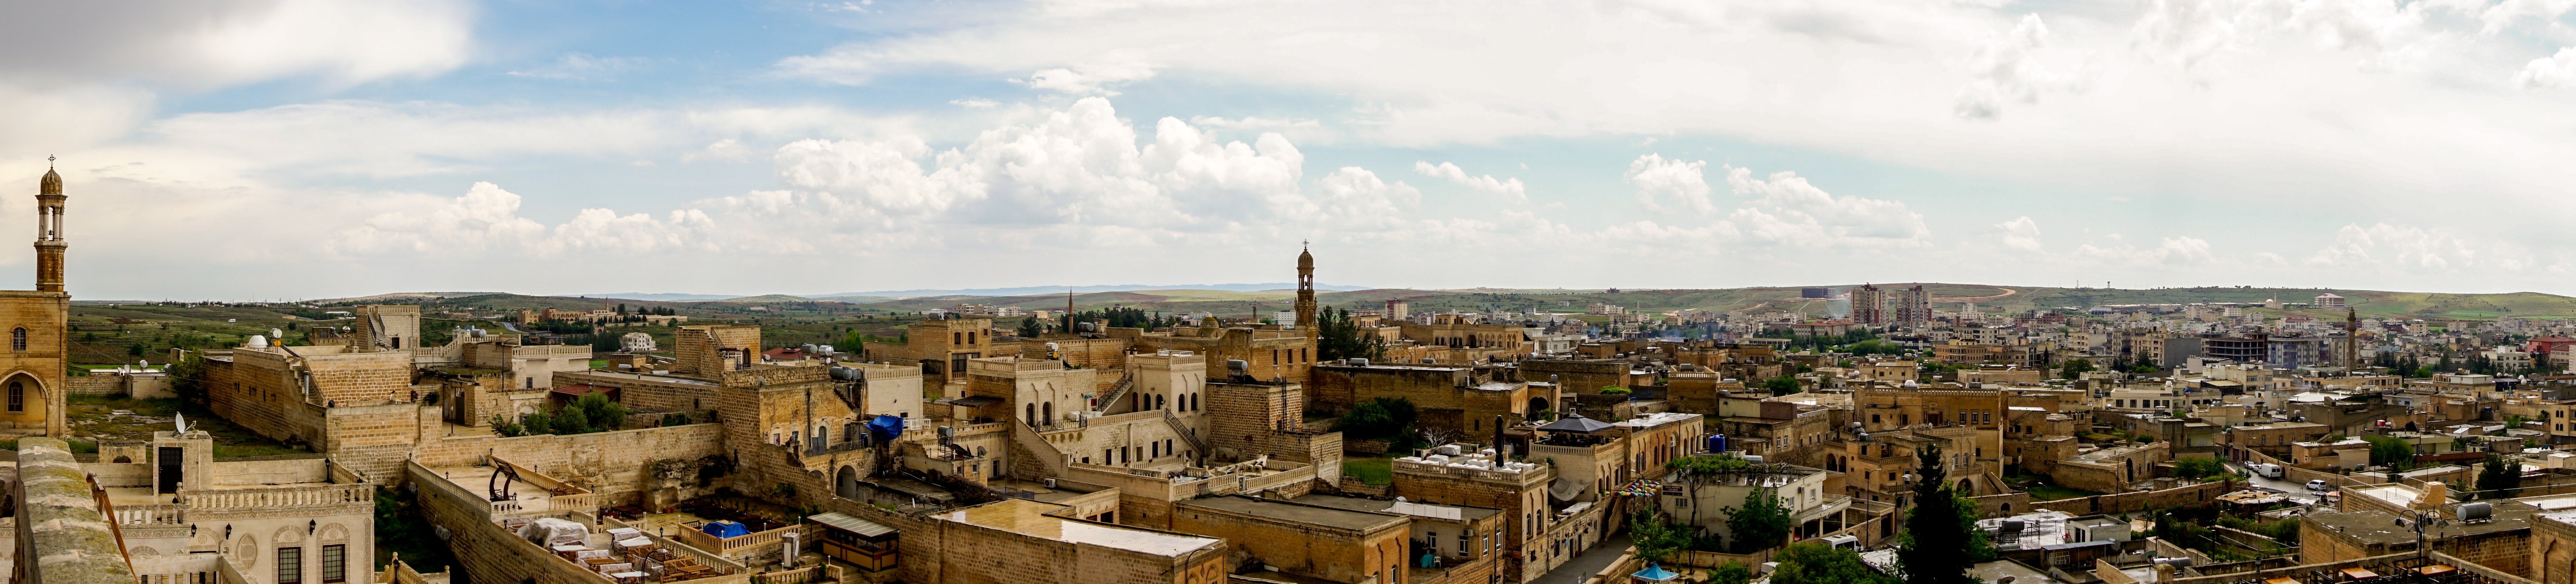 A view from the Midyat district, Mardin, southeastern Turkey, May 12, 2022. (Shutterstock) 